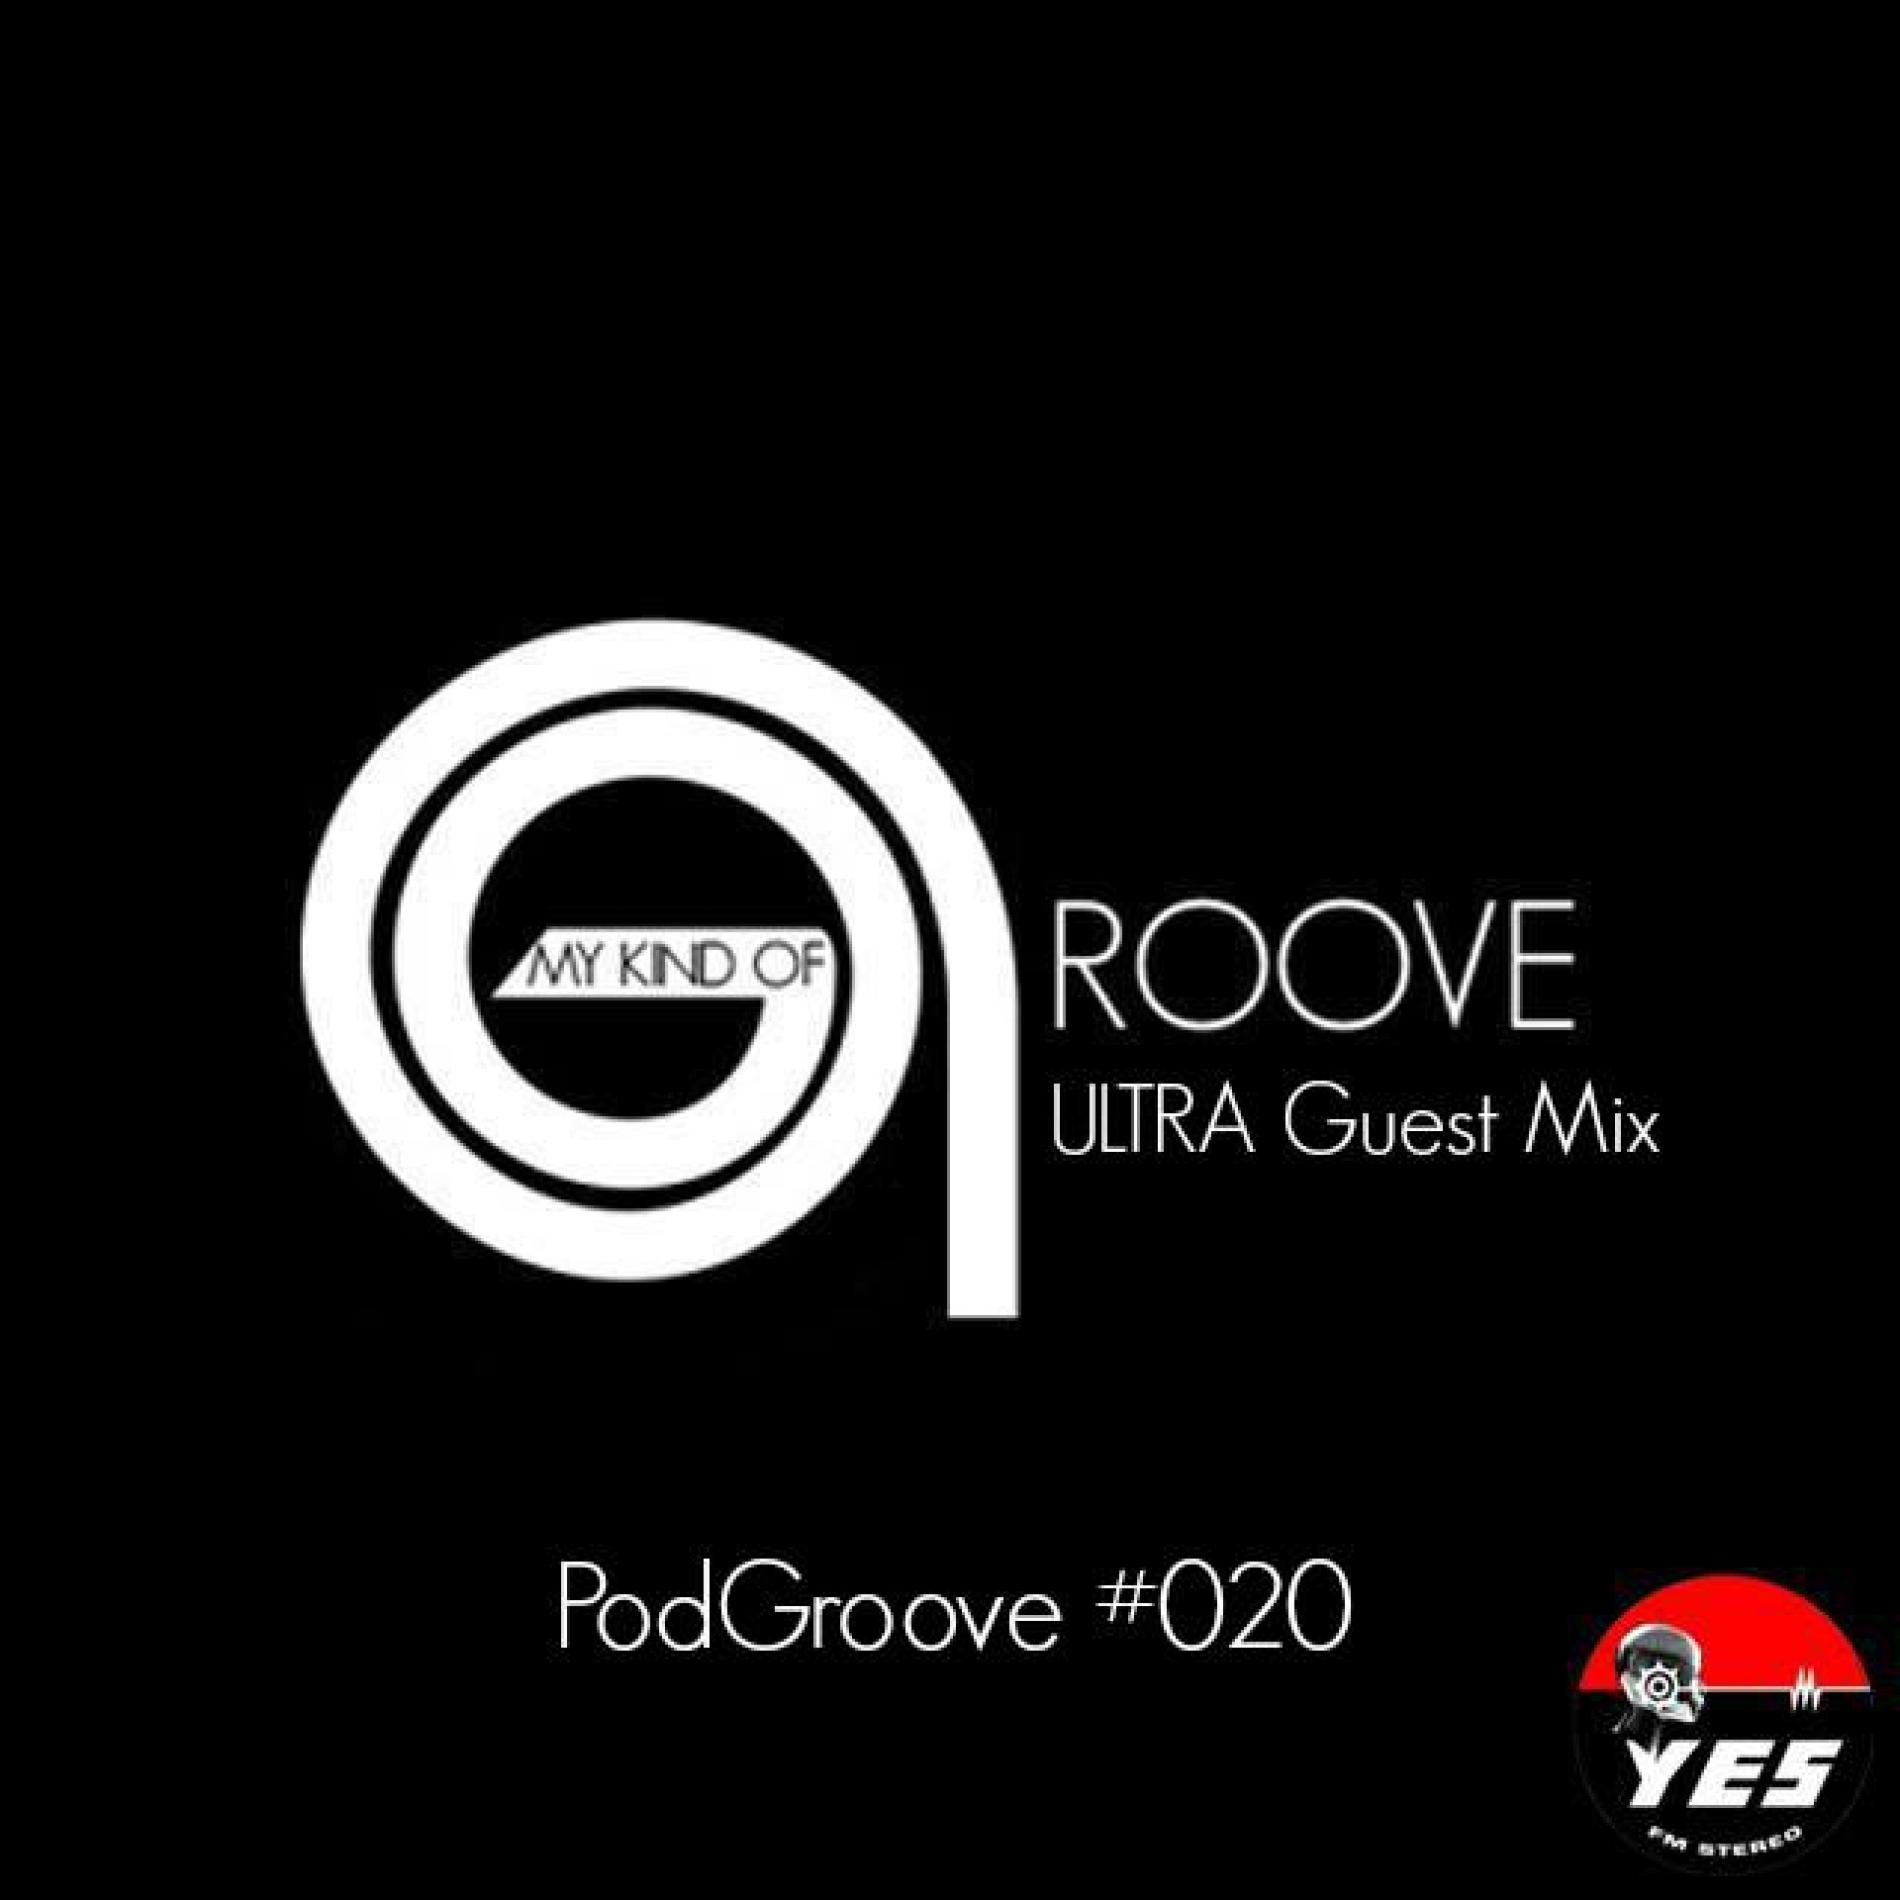 My Kind Of Groove – PodGroove #020 – Ultra Guest Mix